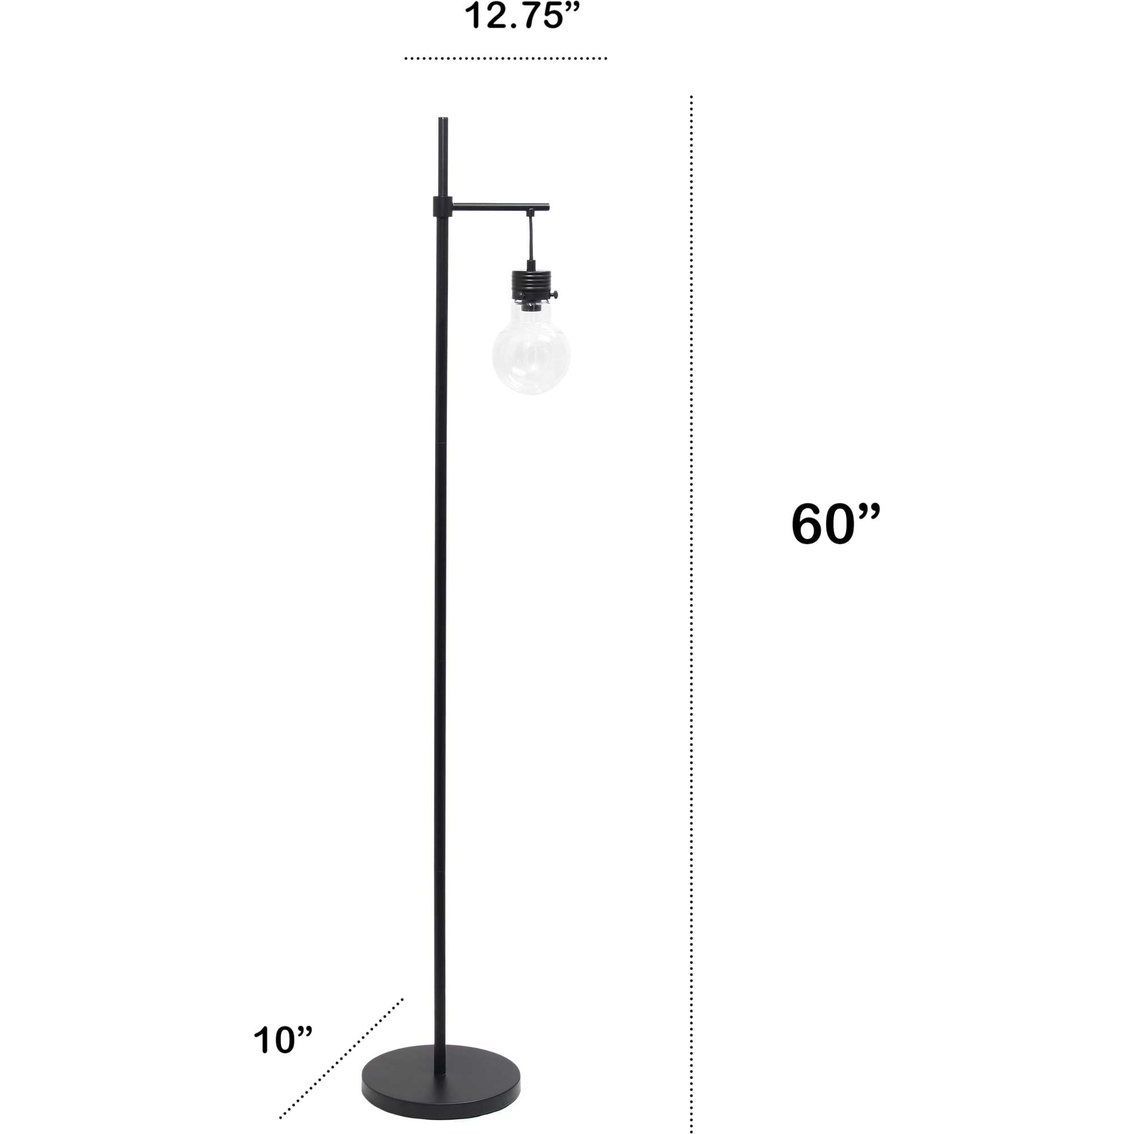 Lalia Home Black Matte 1 Light Beacon Floor Lamp with Clear Glass Shade - Image 7 of 9